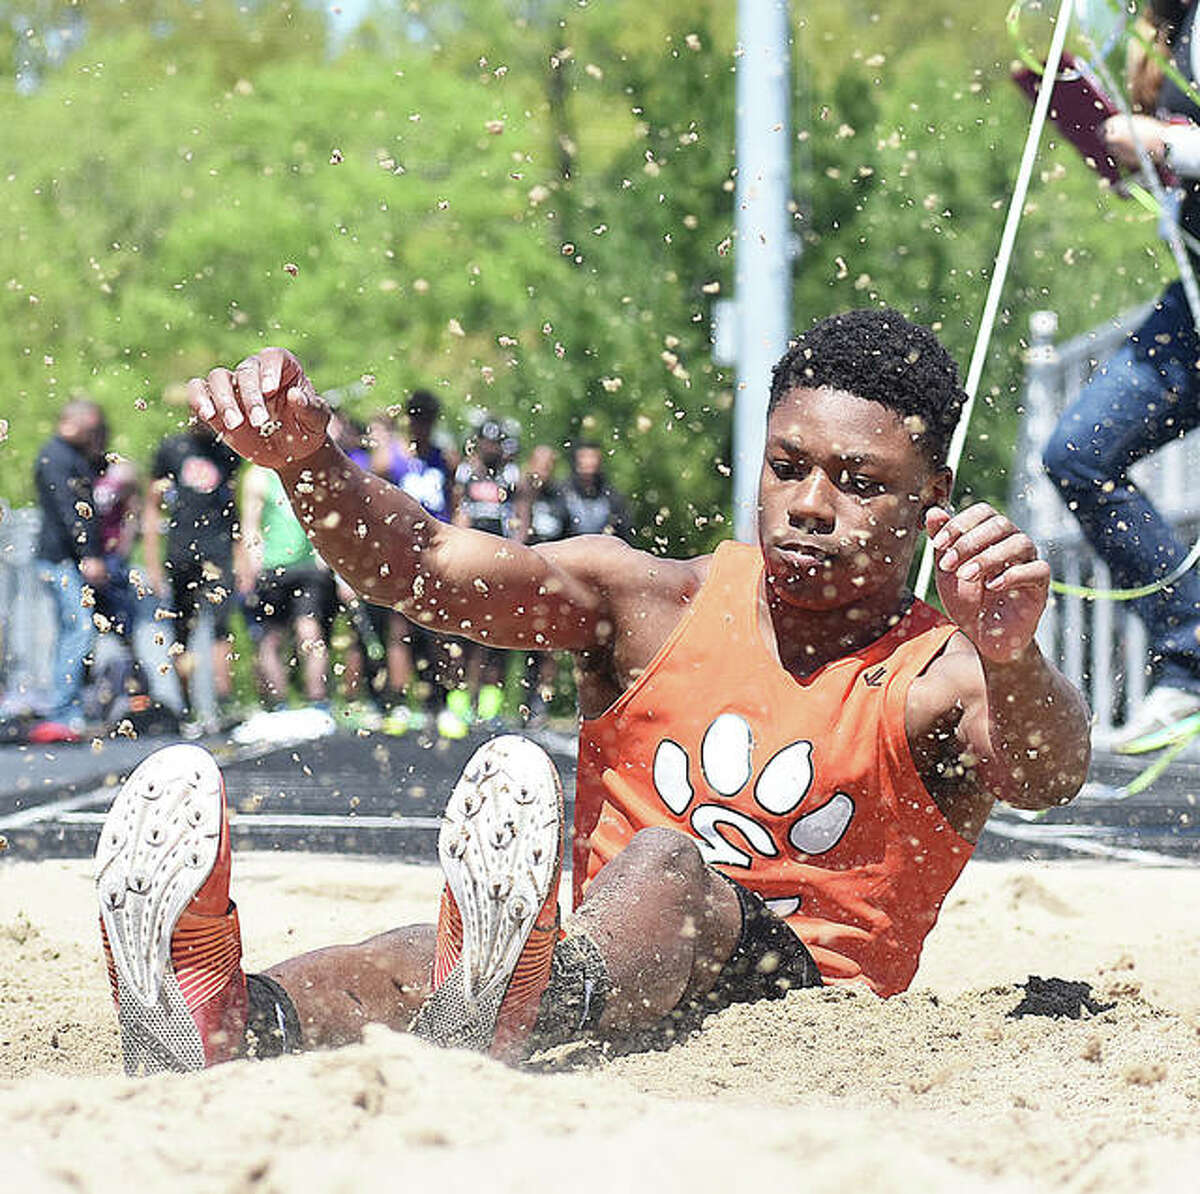 Edwardsville’s Kenyon Johnson completes a long jump during the Triad Invitational earlier in the season in Troy. Johnson broke the school record Wednesday in Collinsville.